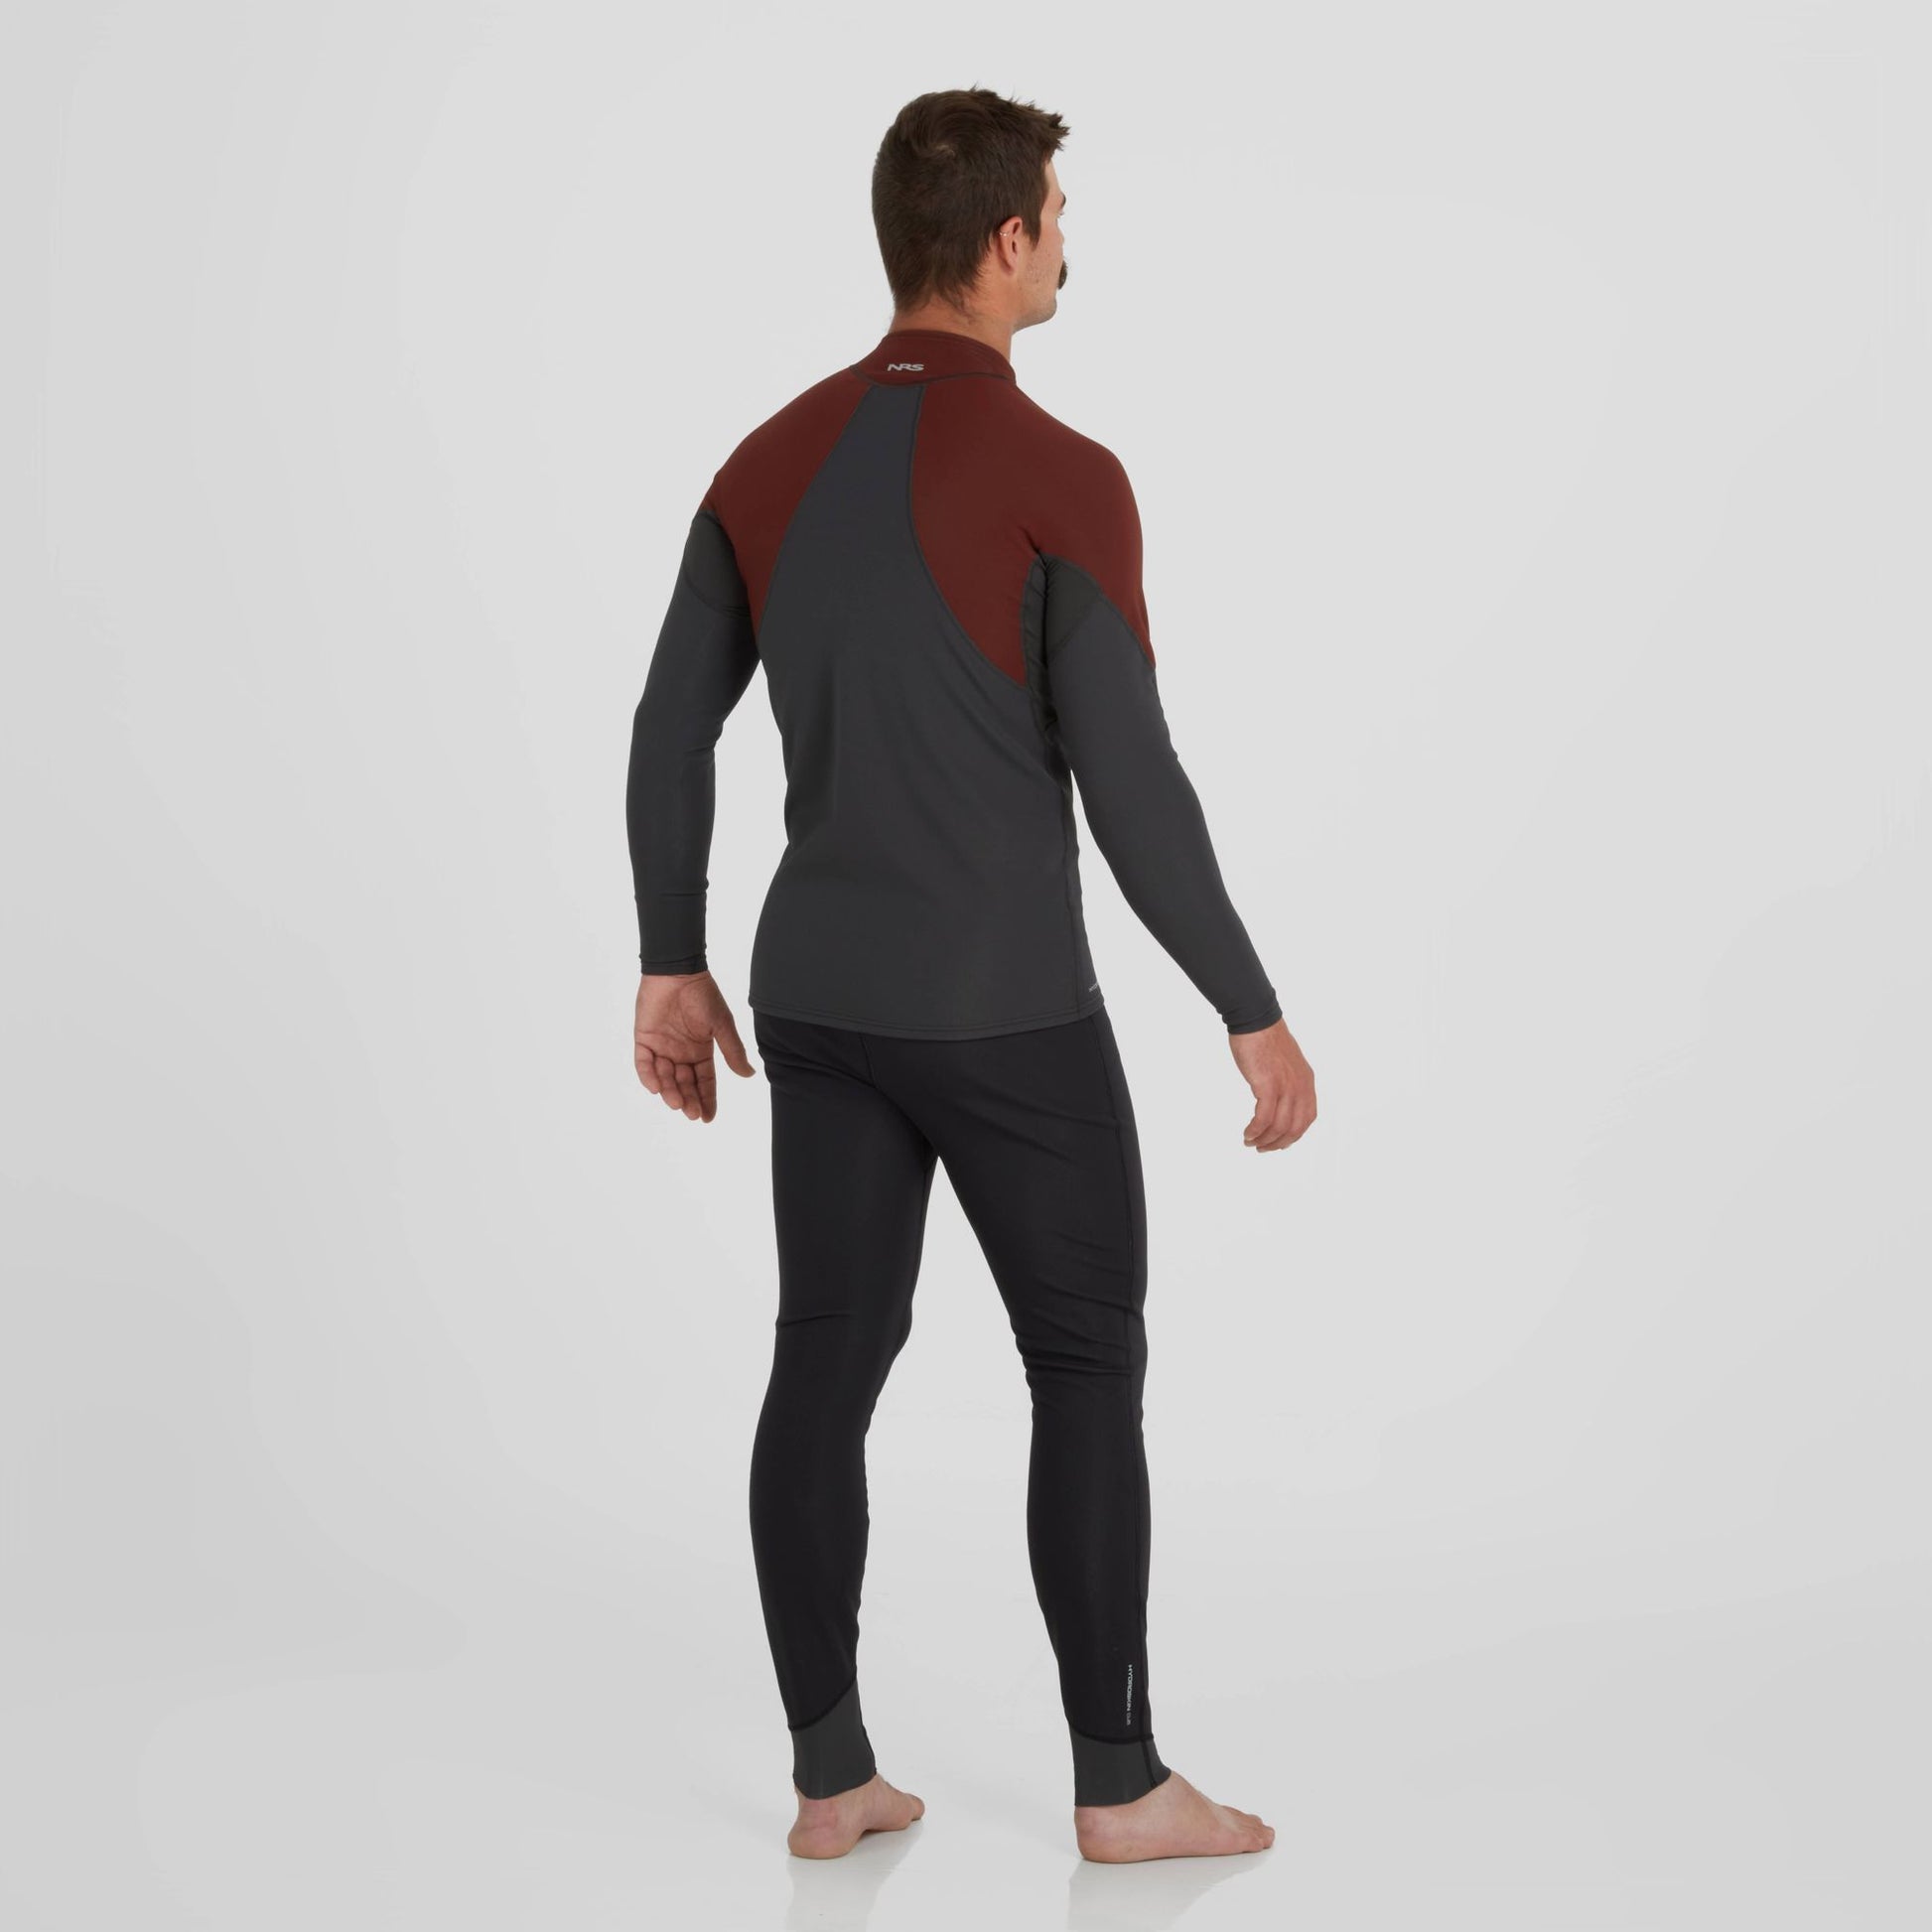 The back view of a man wearing a grey and maroon wetsuit, specifically the NRS Hydroskin 0.5 Long Sleeve Shirt - Men's.